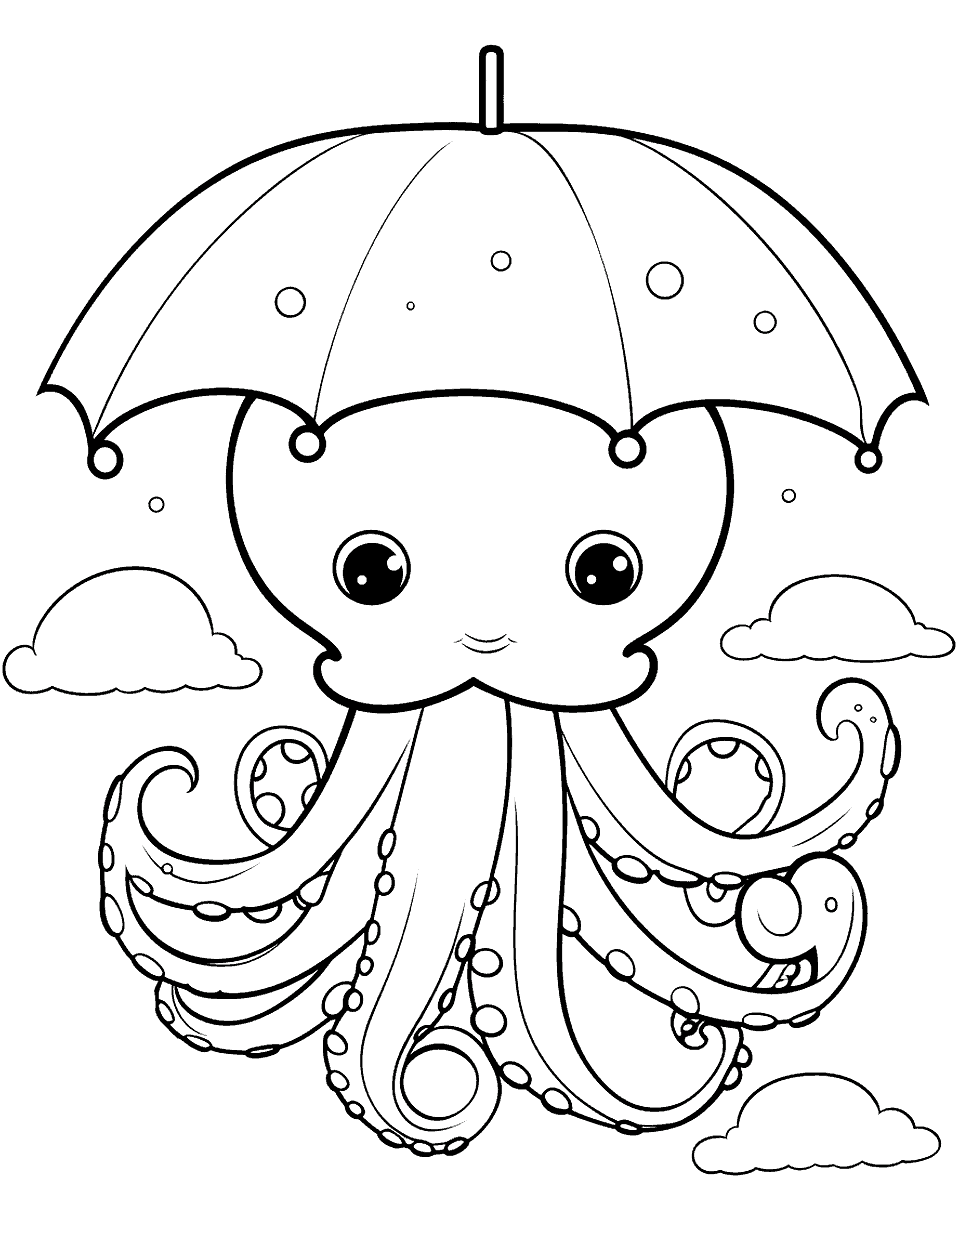 Umbrella Octopus Amongst the Clouds Coloring Page - A whimsical umbrella octopus floating in the sky with clouds around.